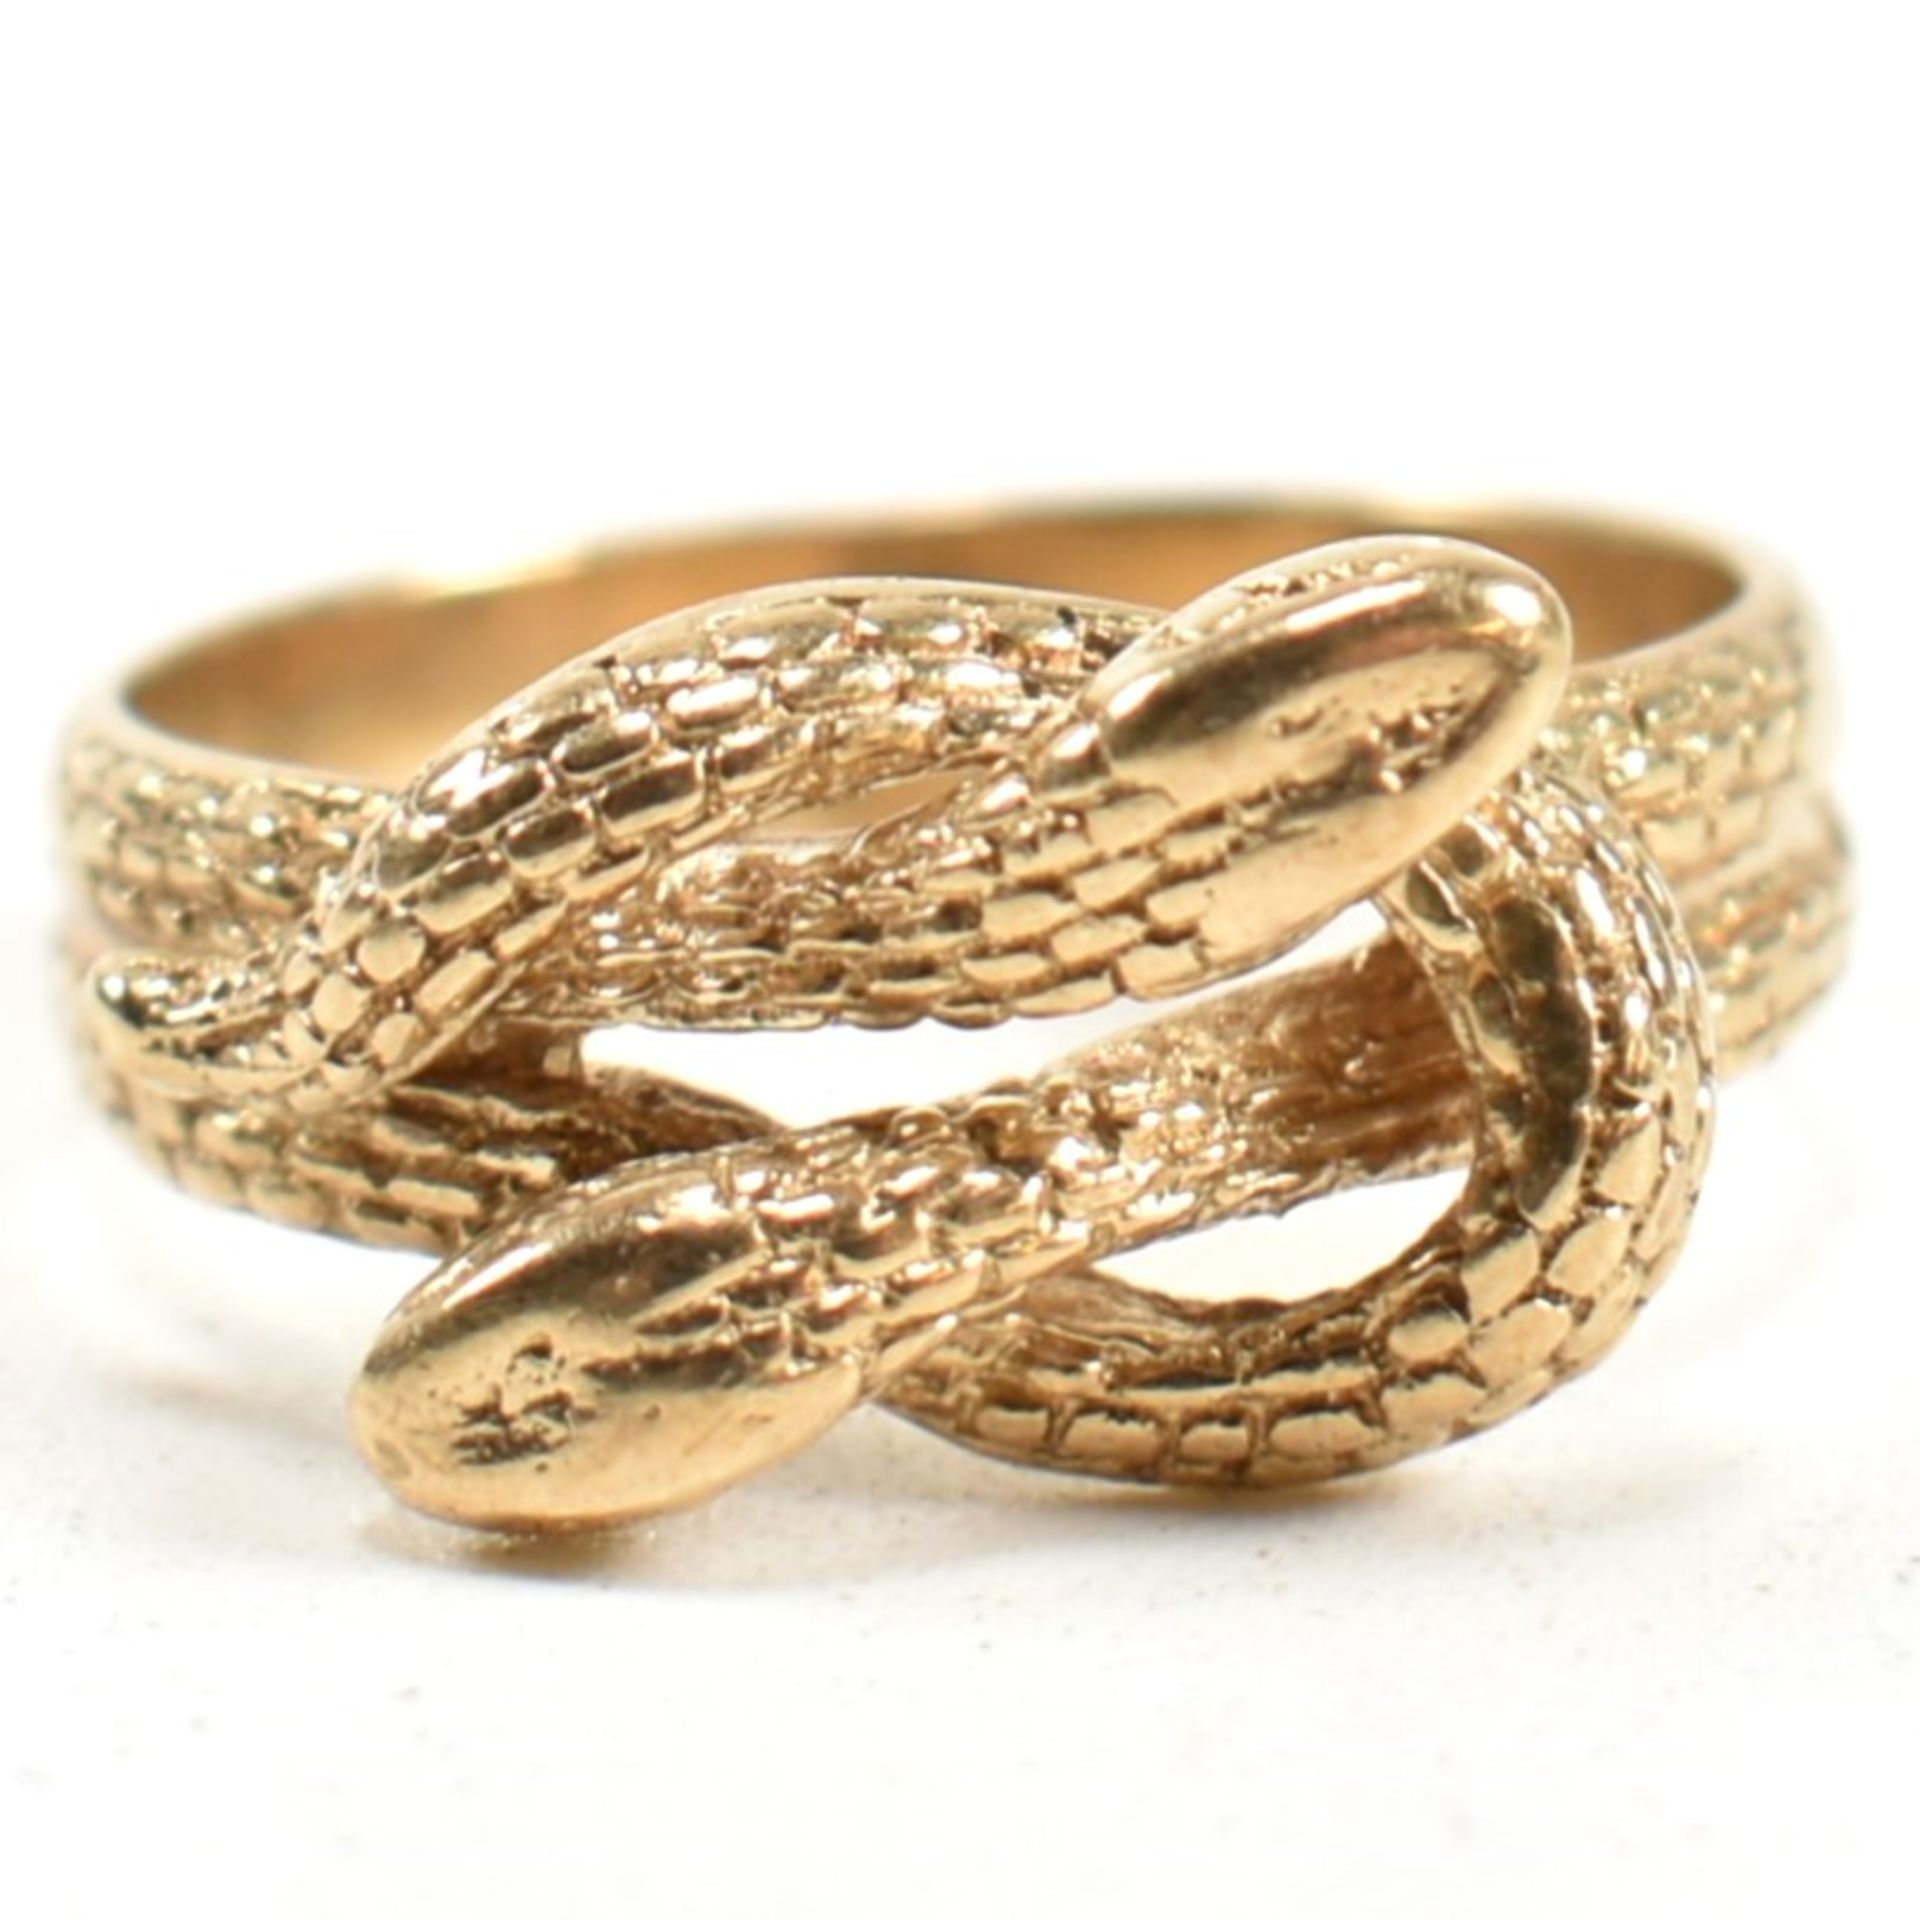 HALLMARKED 9CT GOLD ENTWINED SNAKE RING